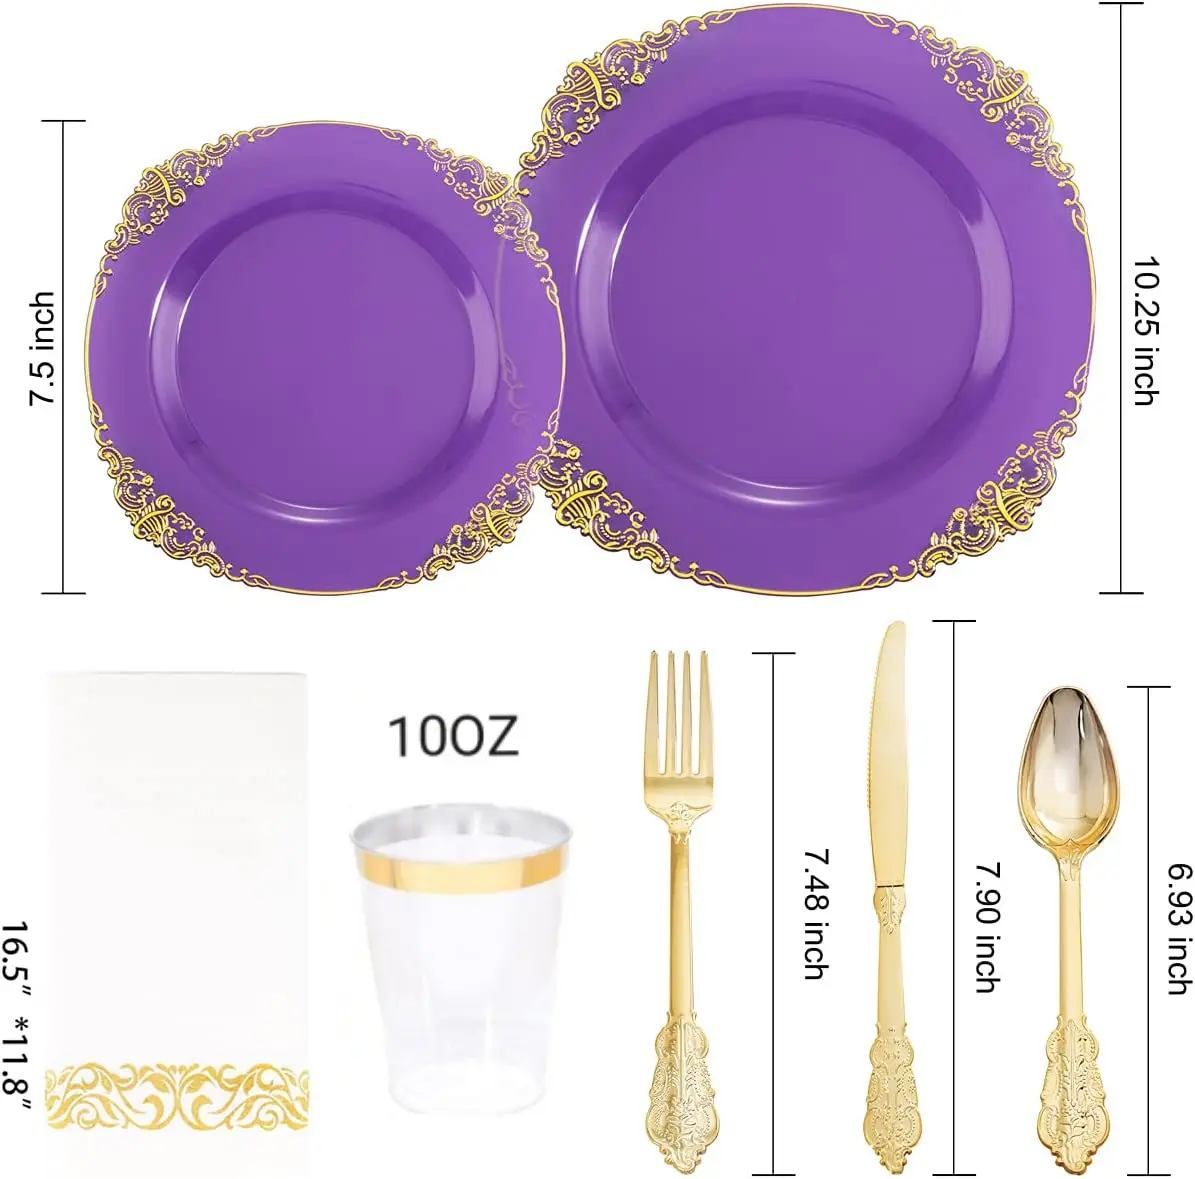 BST 175pcs Disposable food grade plastic 13 inch acrylic transparent purple wedding charger plates with gold rim